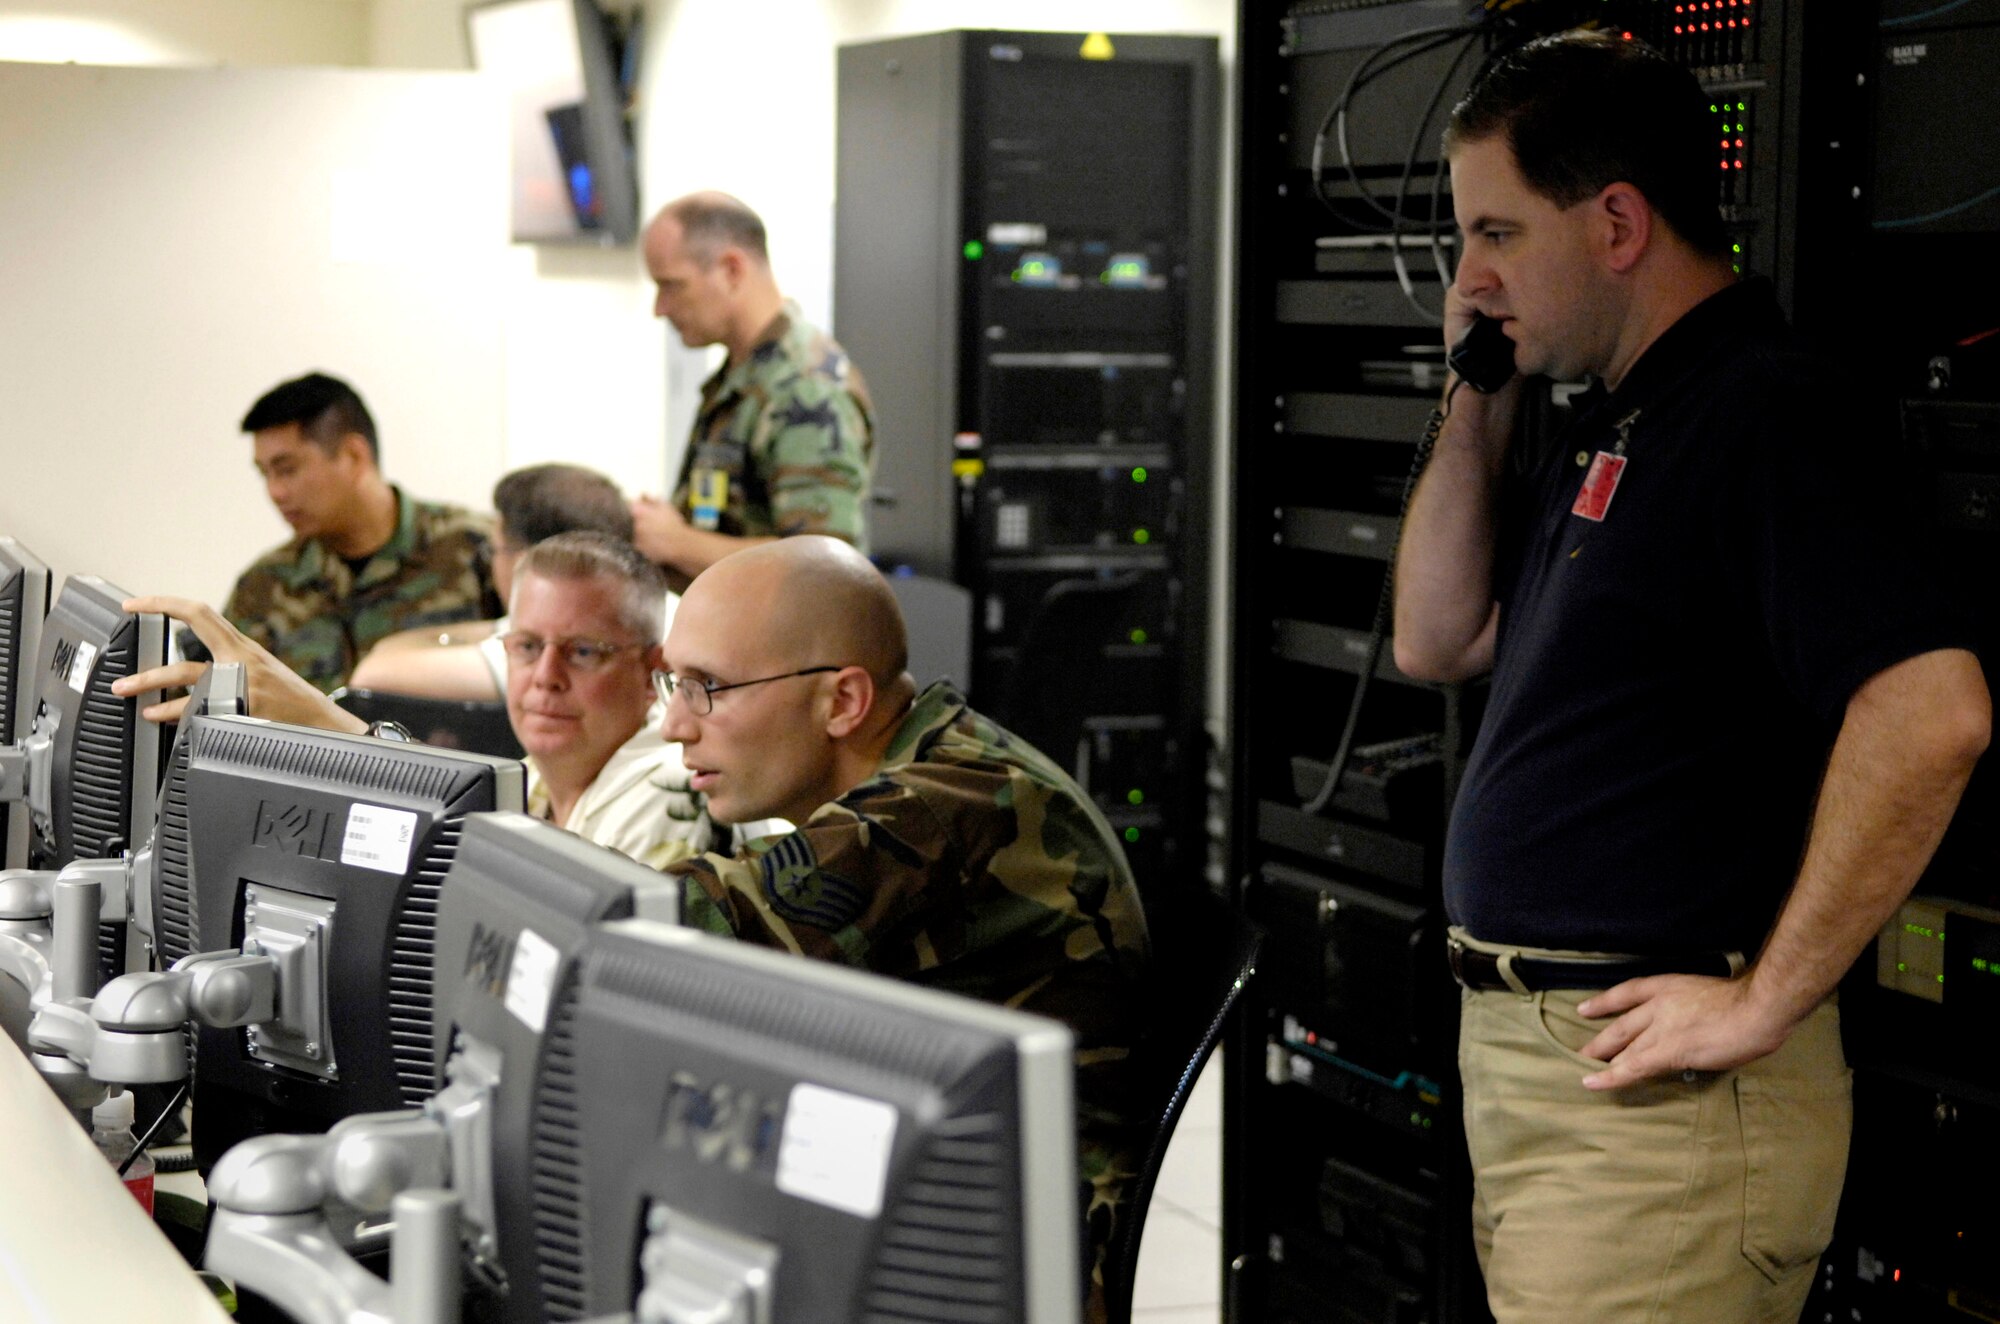 Members of joint interface control cell pull in real time images for operations during Exercise Valiant Shield Aug. 7 in the Air and Space Operation Center at Hickam Air Force Base, Hawaii. The joint interface control cell manages data links for the AOC. Valiant Shield is a week-long exercise that tests the military's ability to rapidly consolidate joint forces in response to regional contingencies, involves approximately 22,000 troops, 30 ships and some 275 aircraft. (U.S. Air Force photo/Tech. Sgt. Shane A. Cuomo) 
